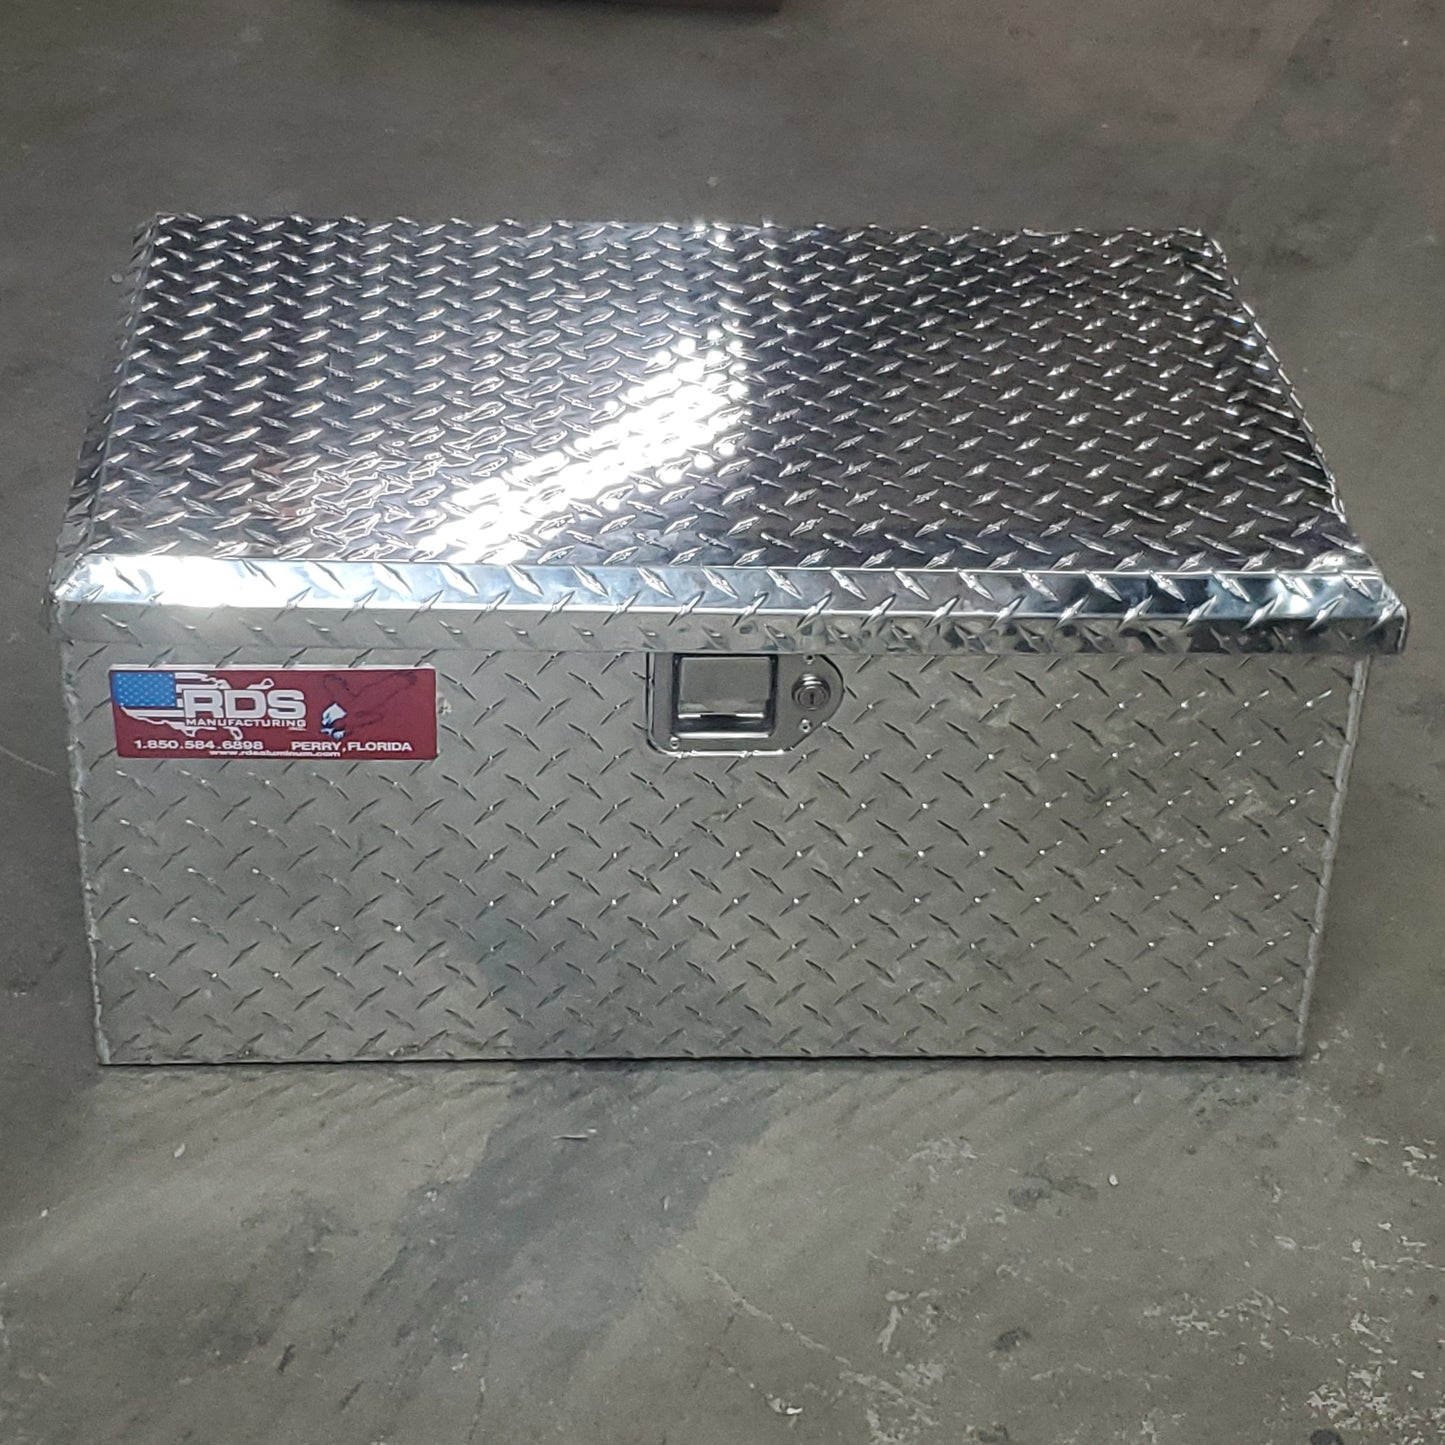 RDS MANUFACTURING Aluminum Truck Box RDS 70198 14"x20"x31" Damaged Top Right Corner AS-IS